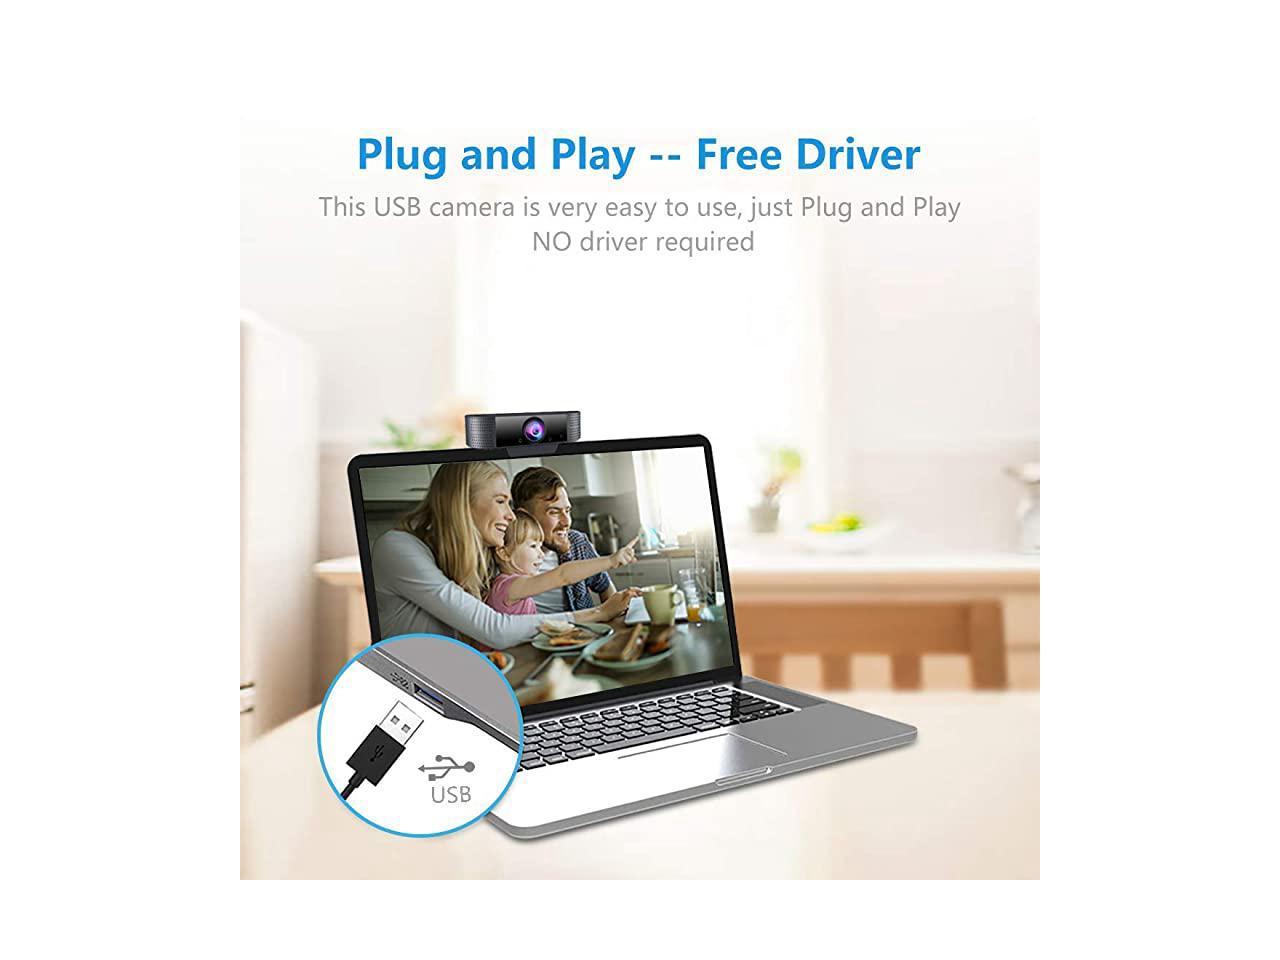 is skype free within usa